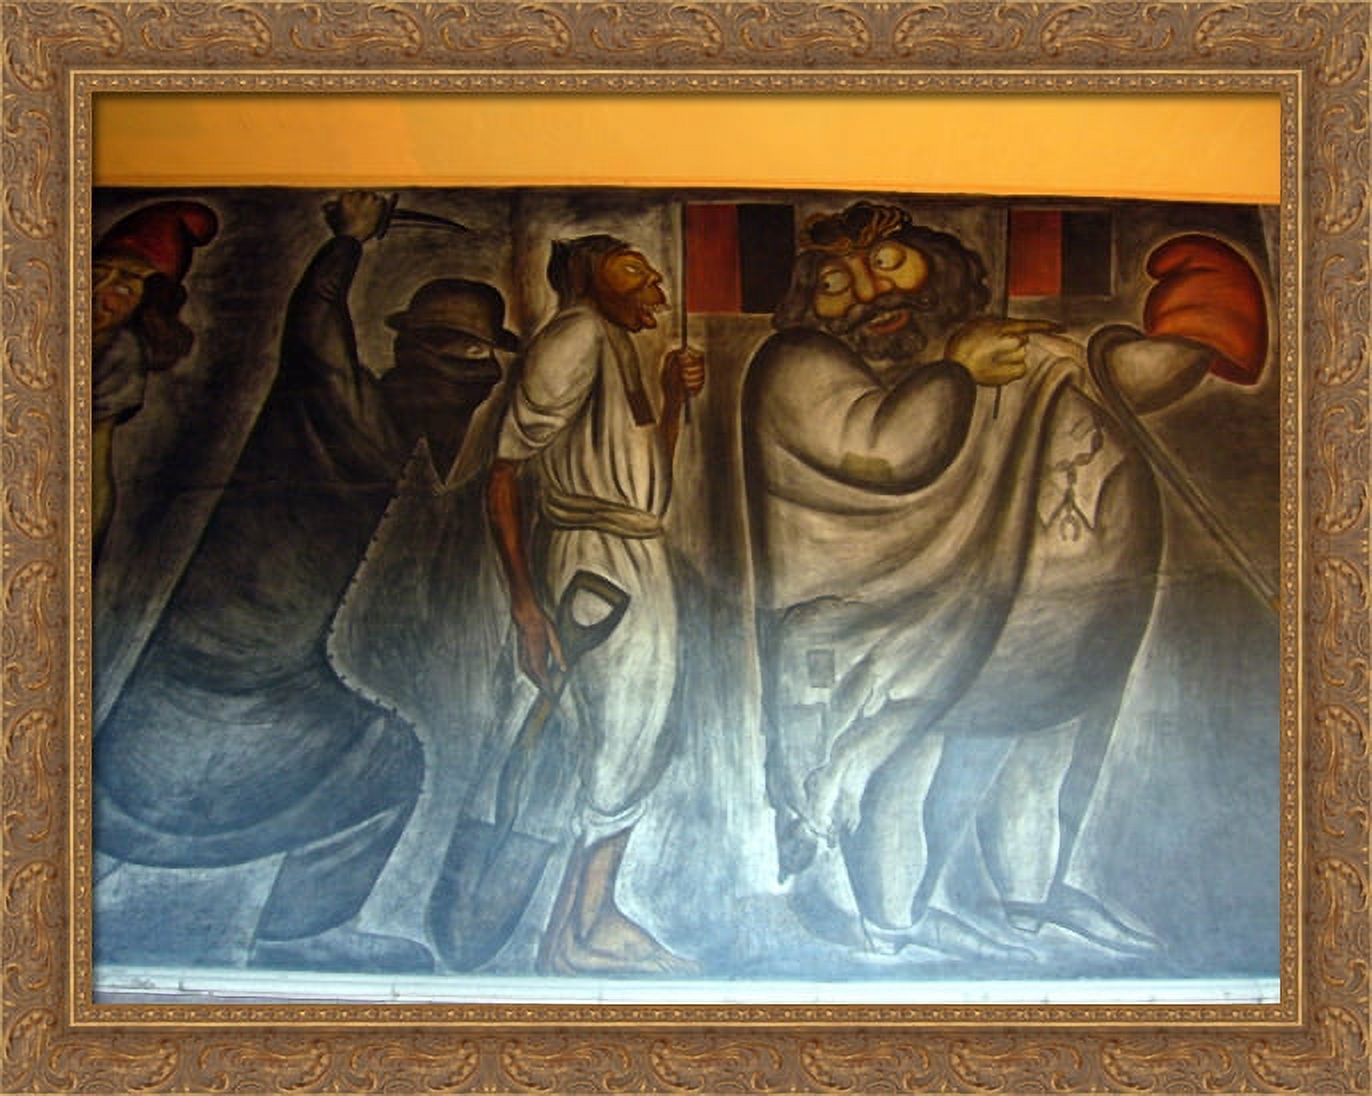 La Acechanza 36x28 Large Gold Ornate Wood Framed Canvas Art by Jose Clemente Orozco - image 1 of 2